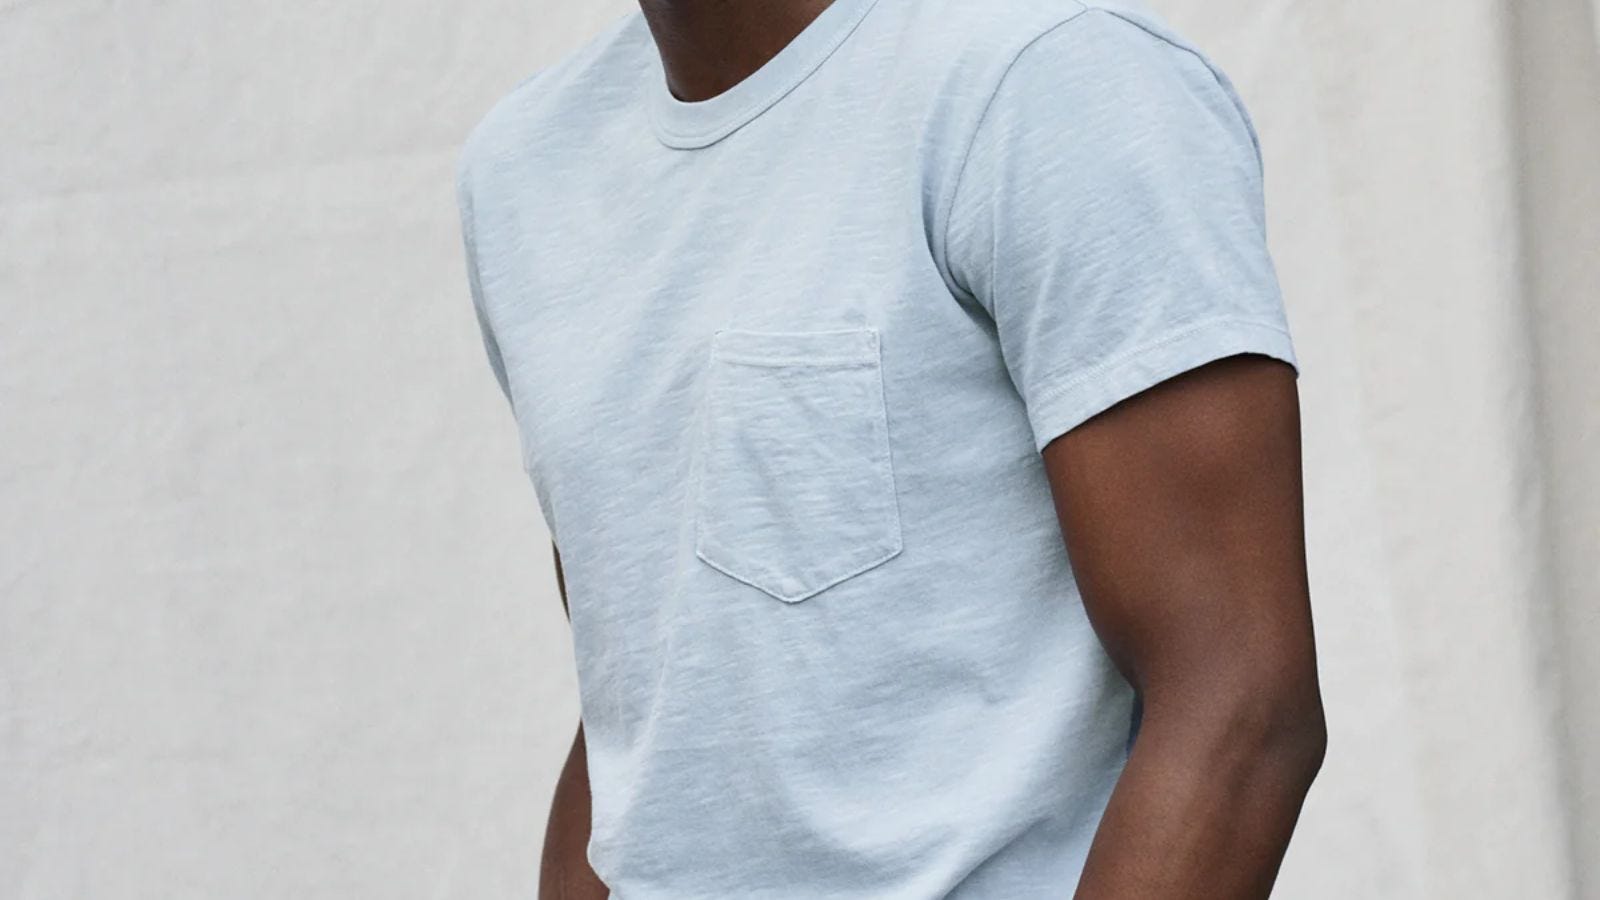 up-close image of man from the neck to the waist, wearing a light blue pocket t-shirt